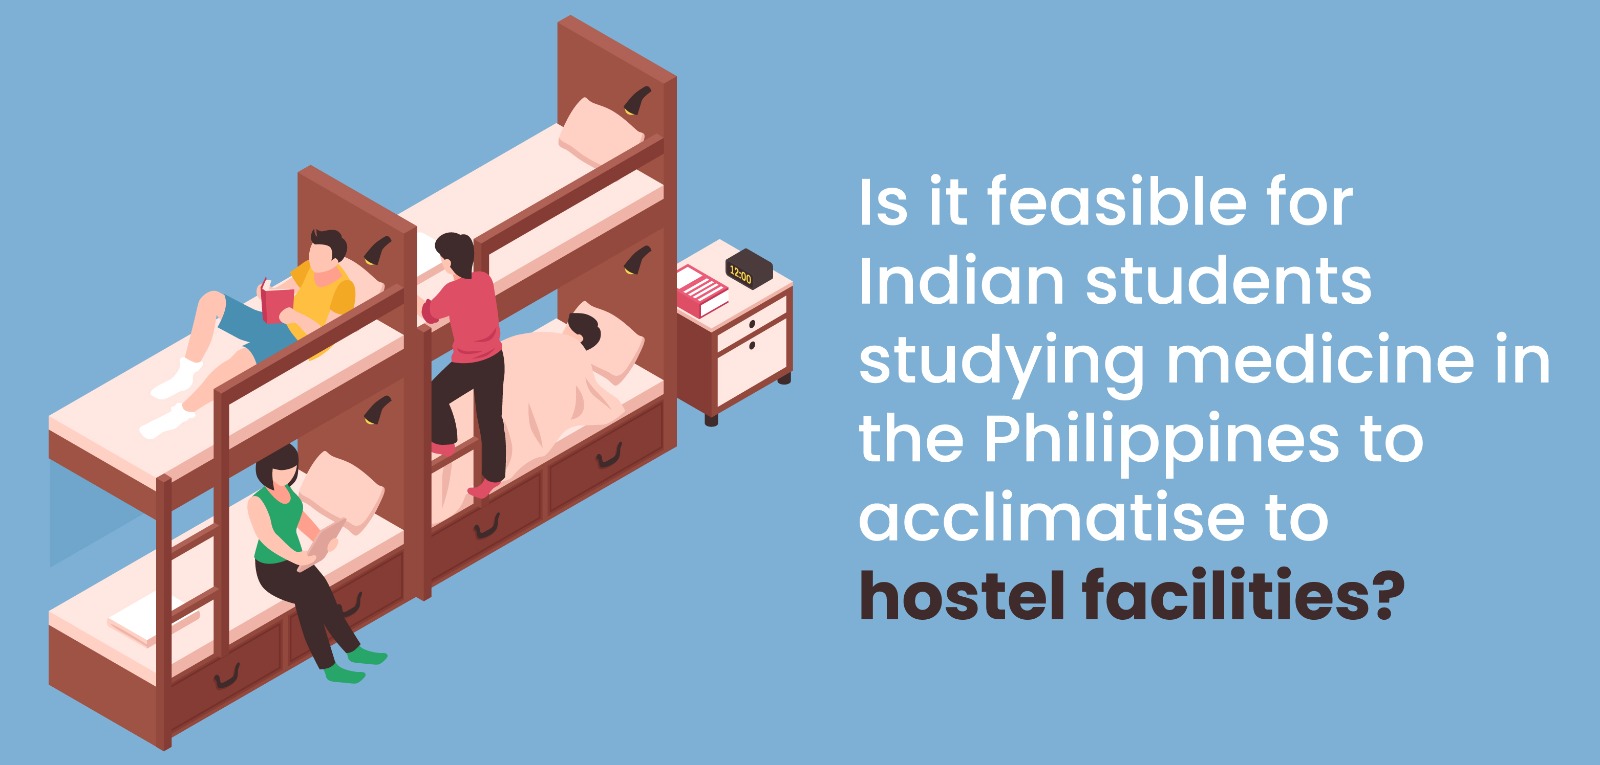 Is it feasible for Indian students studying medicine in the Philippines to acclimatise to hostel facilities?